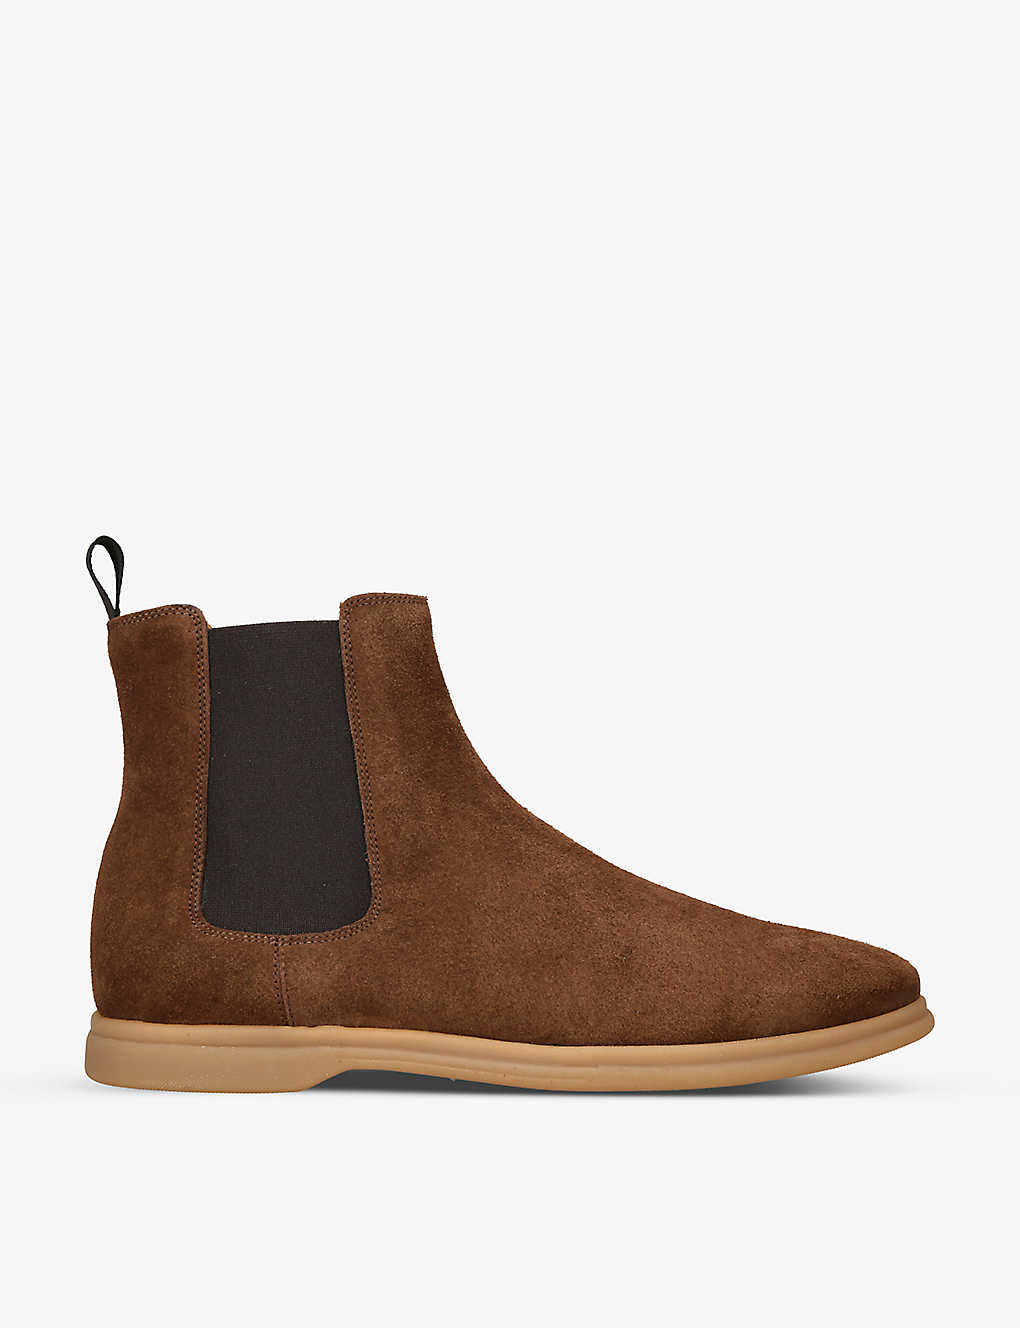 ELEVENTY ELEVENTY MEN'S TAN CONTRAST-SOLE TONAL-STITCHING SUEDE CHELSEA BOOTS